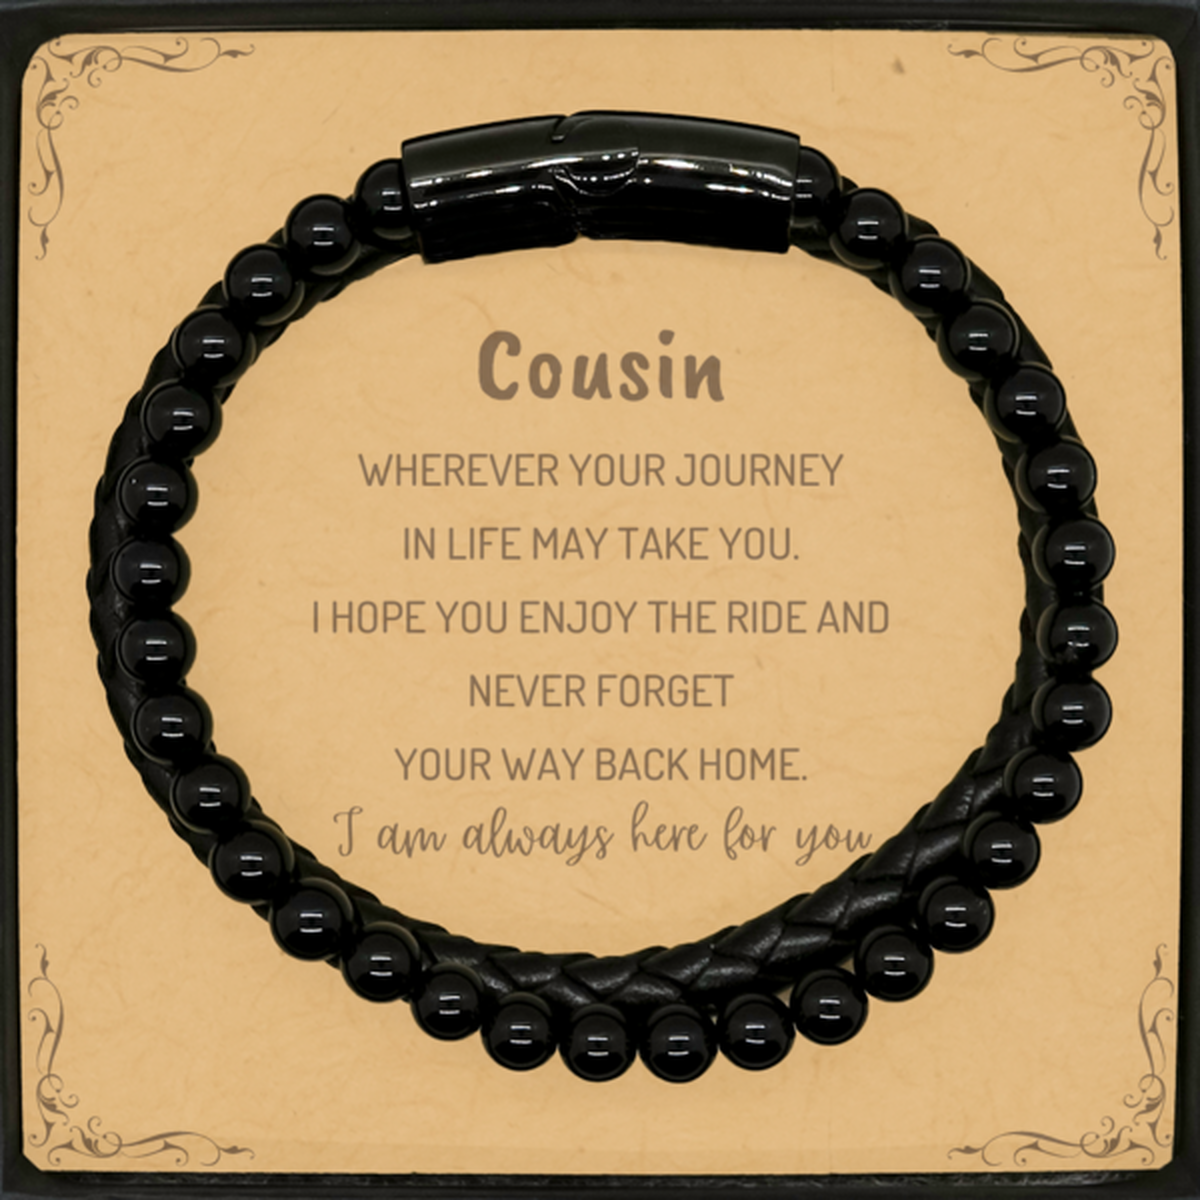 Cousin wherever your journey in life may take you, I am always here for you Cousin Stone Leather Bracelets, Awesome Christmas Gifts For Cousin Message Card, Cousin Birthday Gifts for Men Women Family Loved One